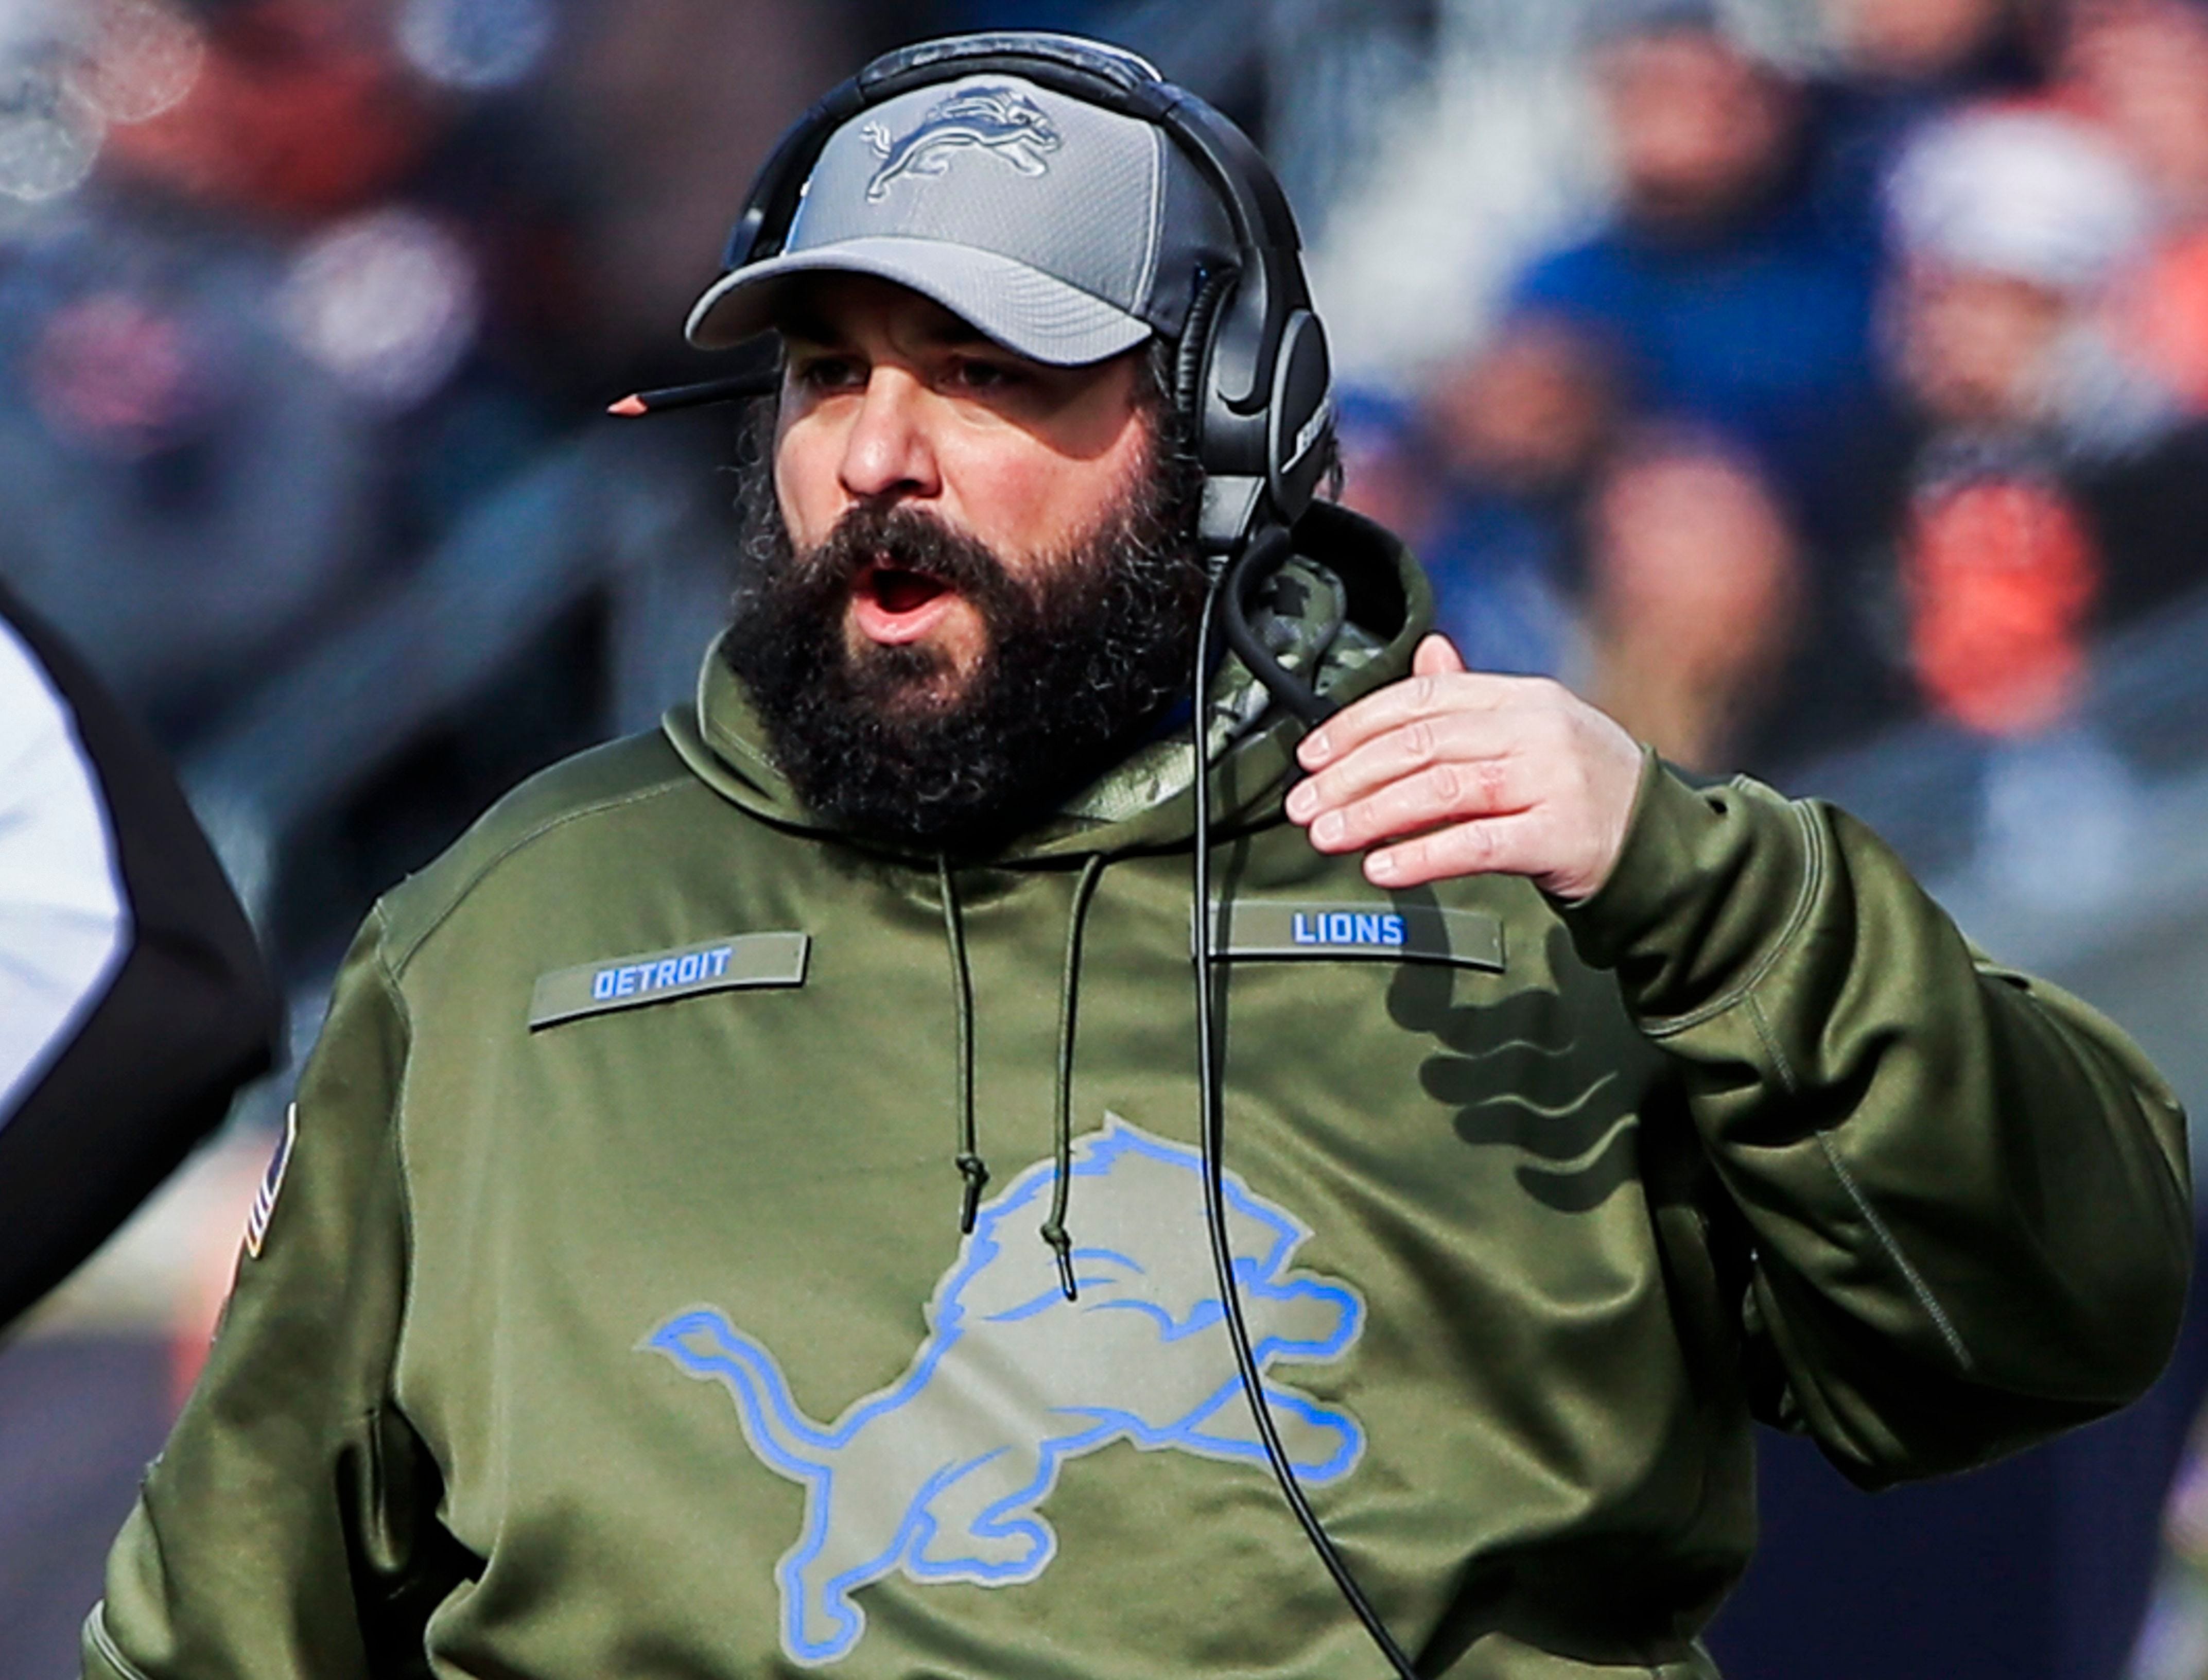 Detroit Lions coach Matt Patricia 'disgusted, angry, sad' after seeing George Floyd video